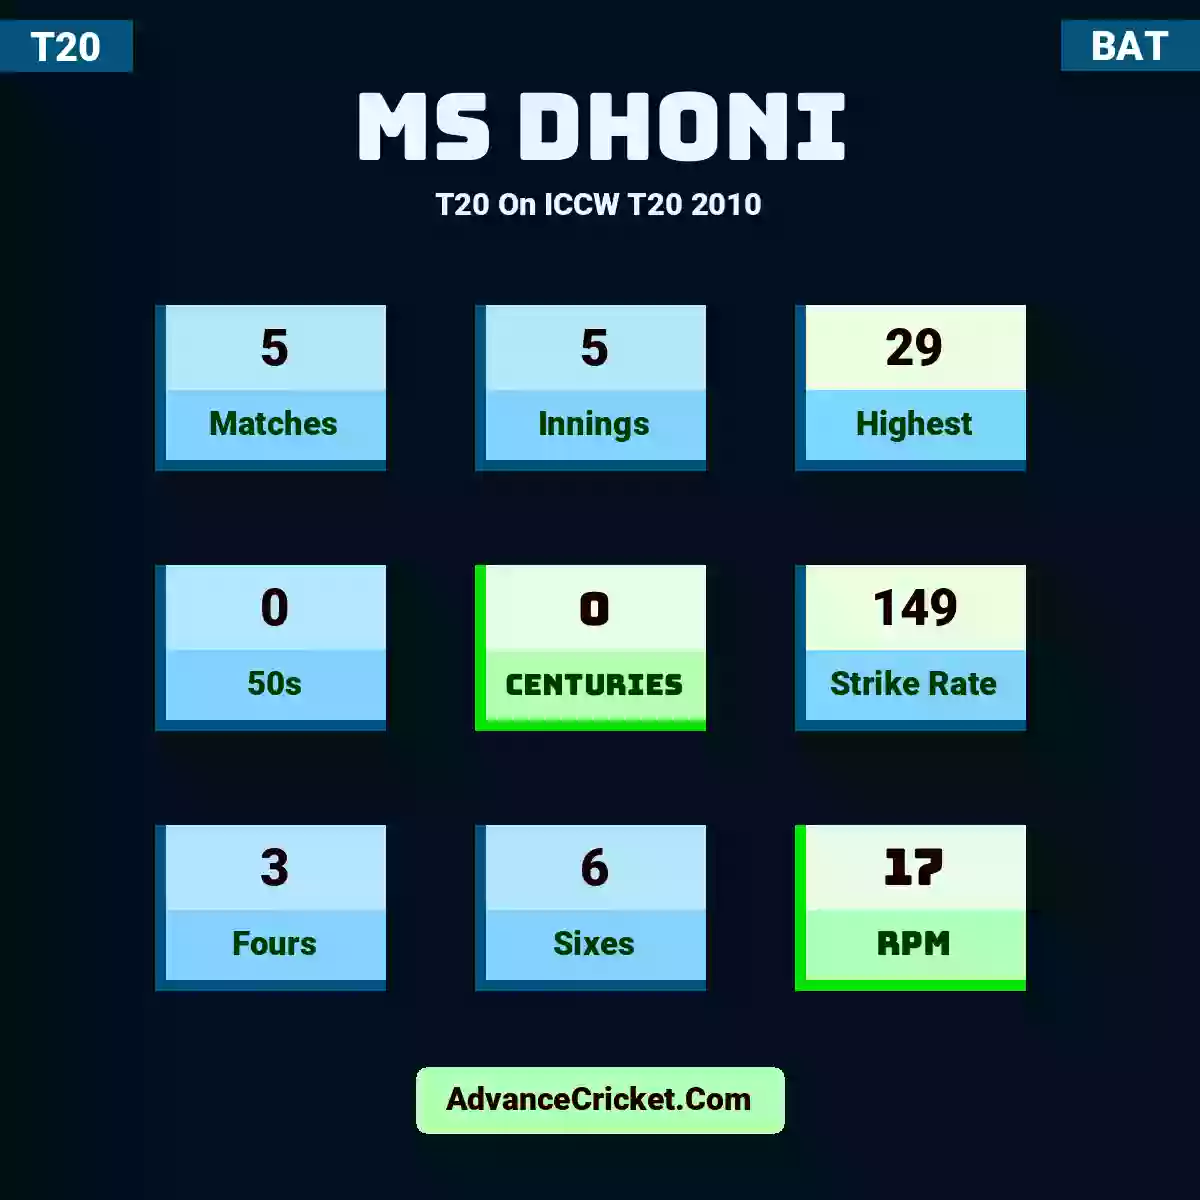 MS Dhoni T20  On ICCW T20 2010, MS Dhoni played 5 matches, scored 29 runs as highest, 0 half-centuries, and 0 centuries, with a strike rate of 149. M.Dhoni hit 3 fours and 6 sixes, with an RPM of 17.